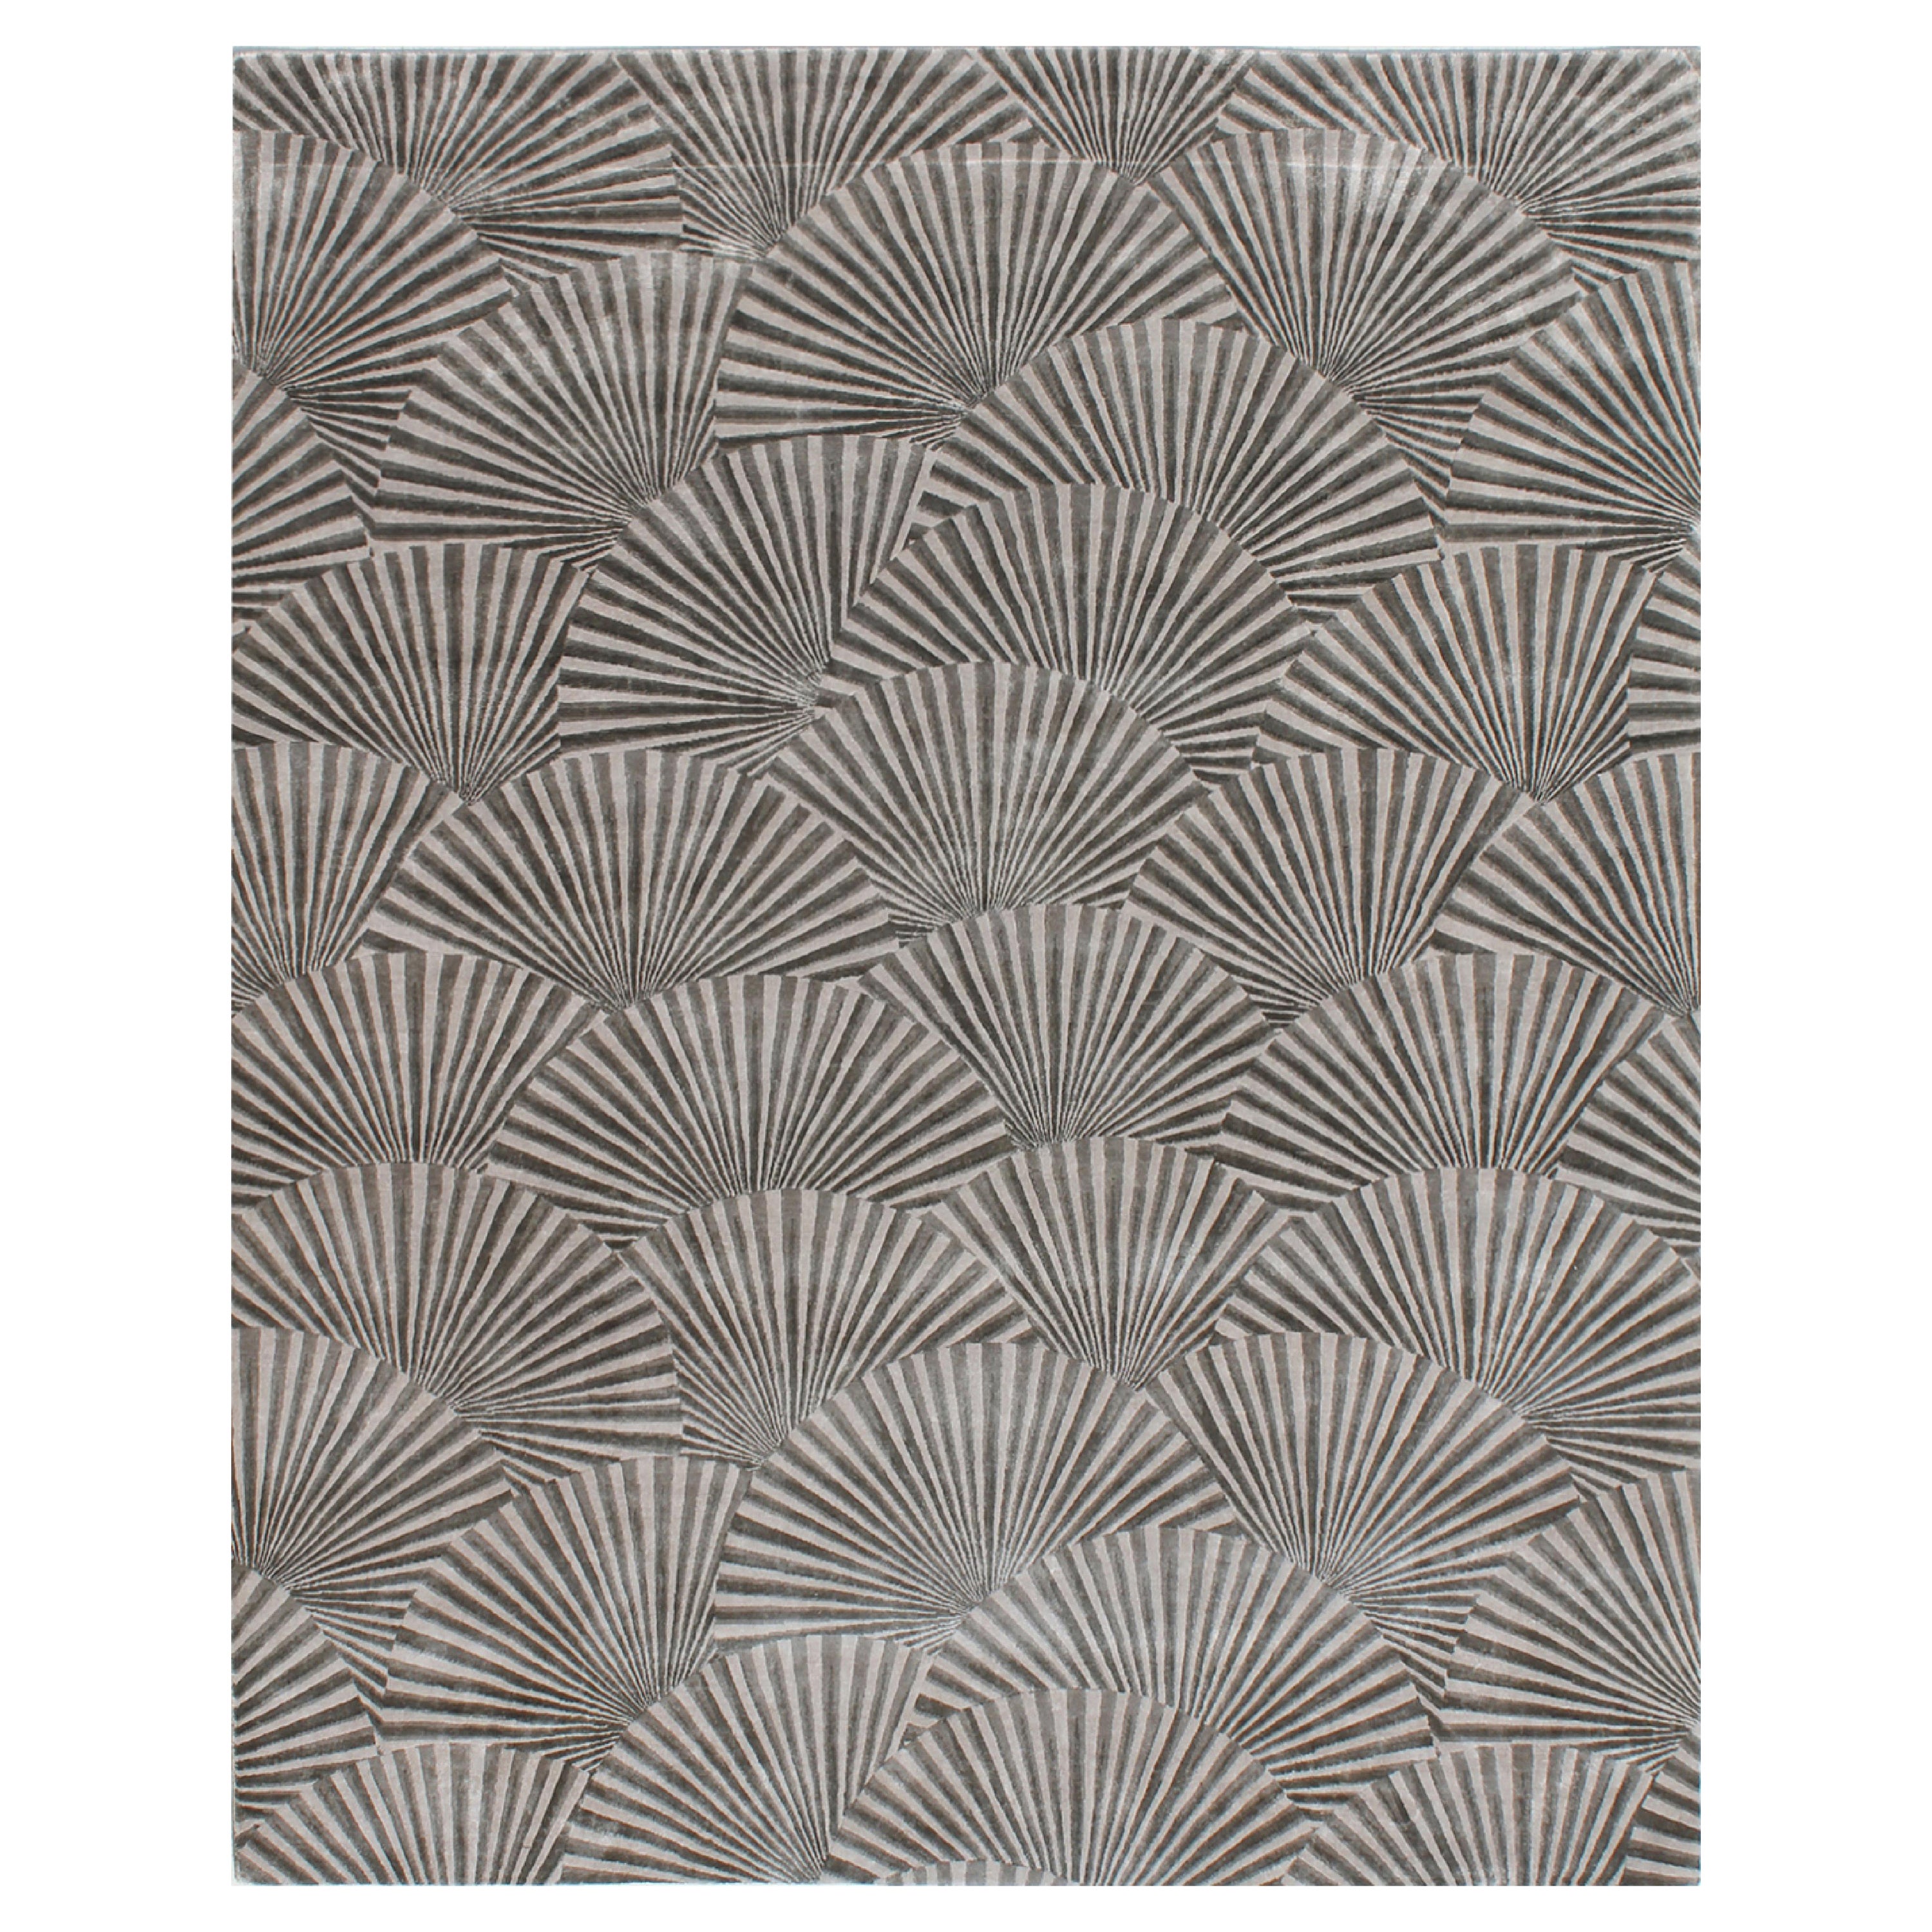 PRUNIFERA Hand Knotted Contemporary Silk Rug in Beige Taupe Colour by Hands